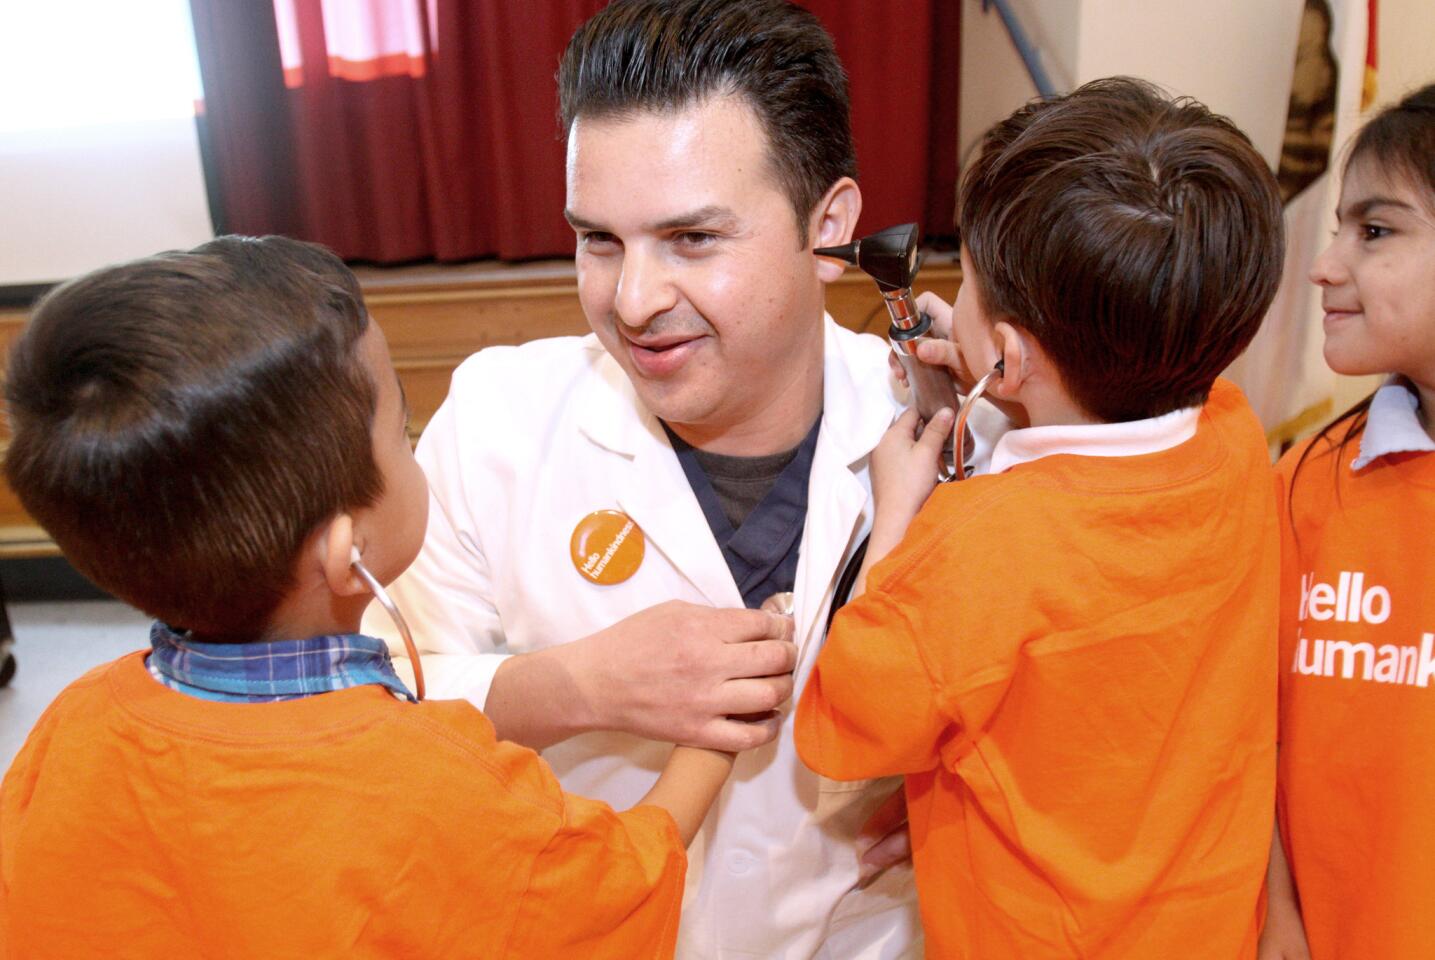 After speaking about being a good neighbor and eating healthy foods, Dignity Health Glendale Memorial Hospital Family Medicine Doctor Antonio Zamorano gets checked out by eager transitional Kindergarten students at Cerritos Elementary School in Glendale on Thursday, Jan. 28, 2016. Dr. Zamorano, who came out with a Batman mask, also showed children some of the items used by doctors at the hospital, including a syringe, needle and stitches and stethoscope.